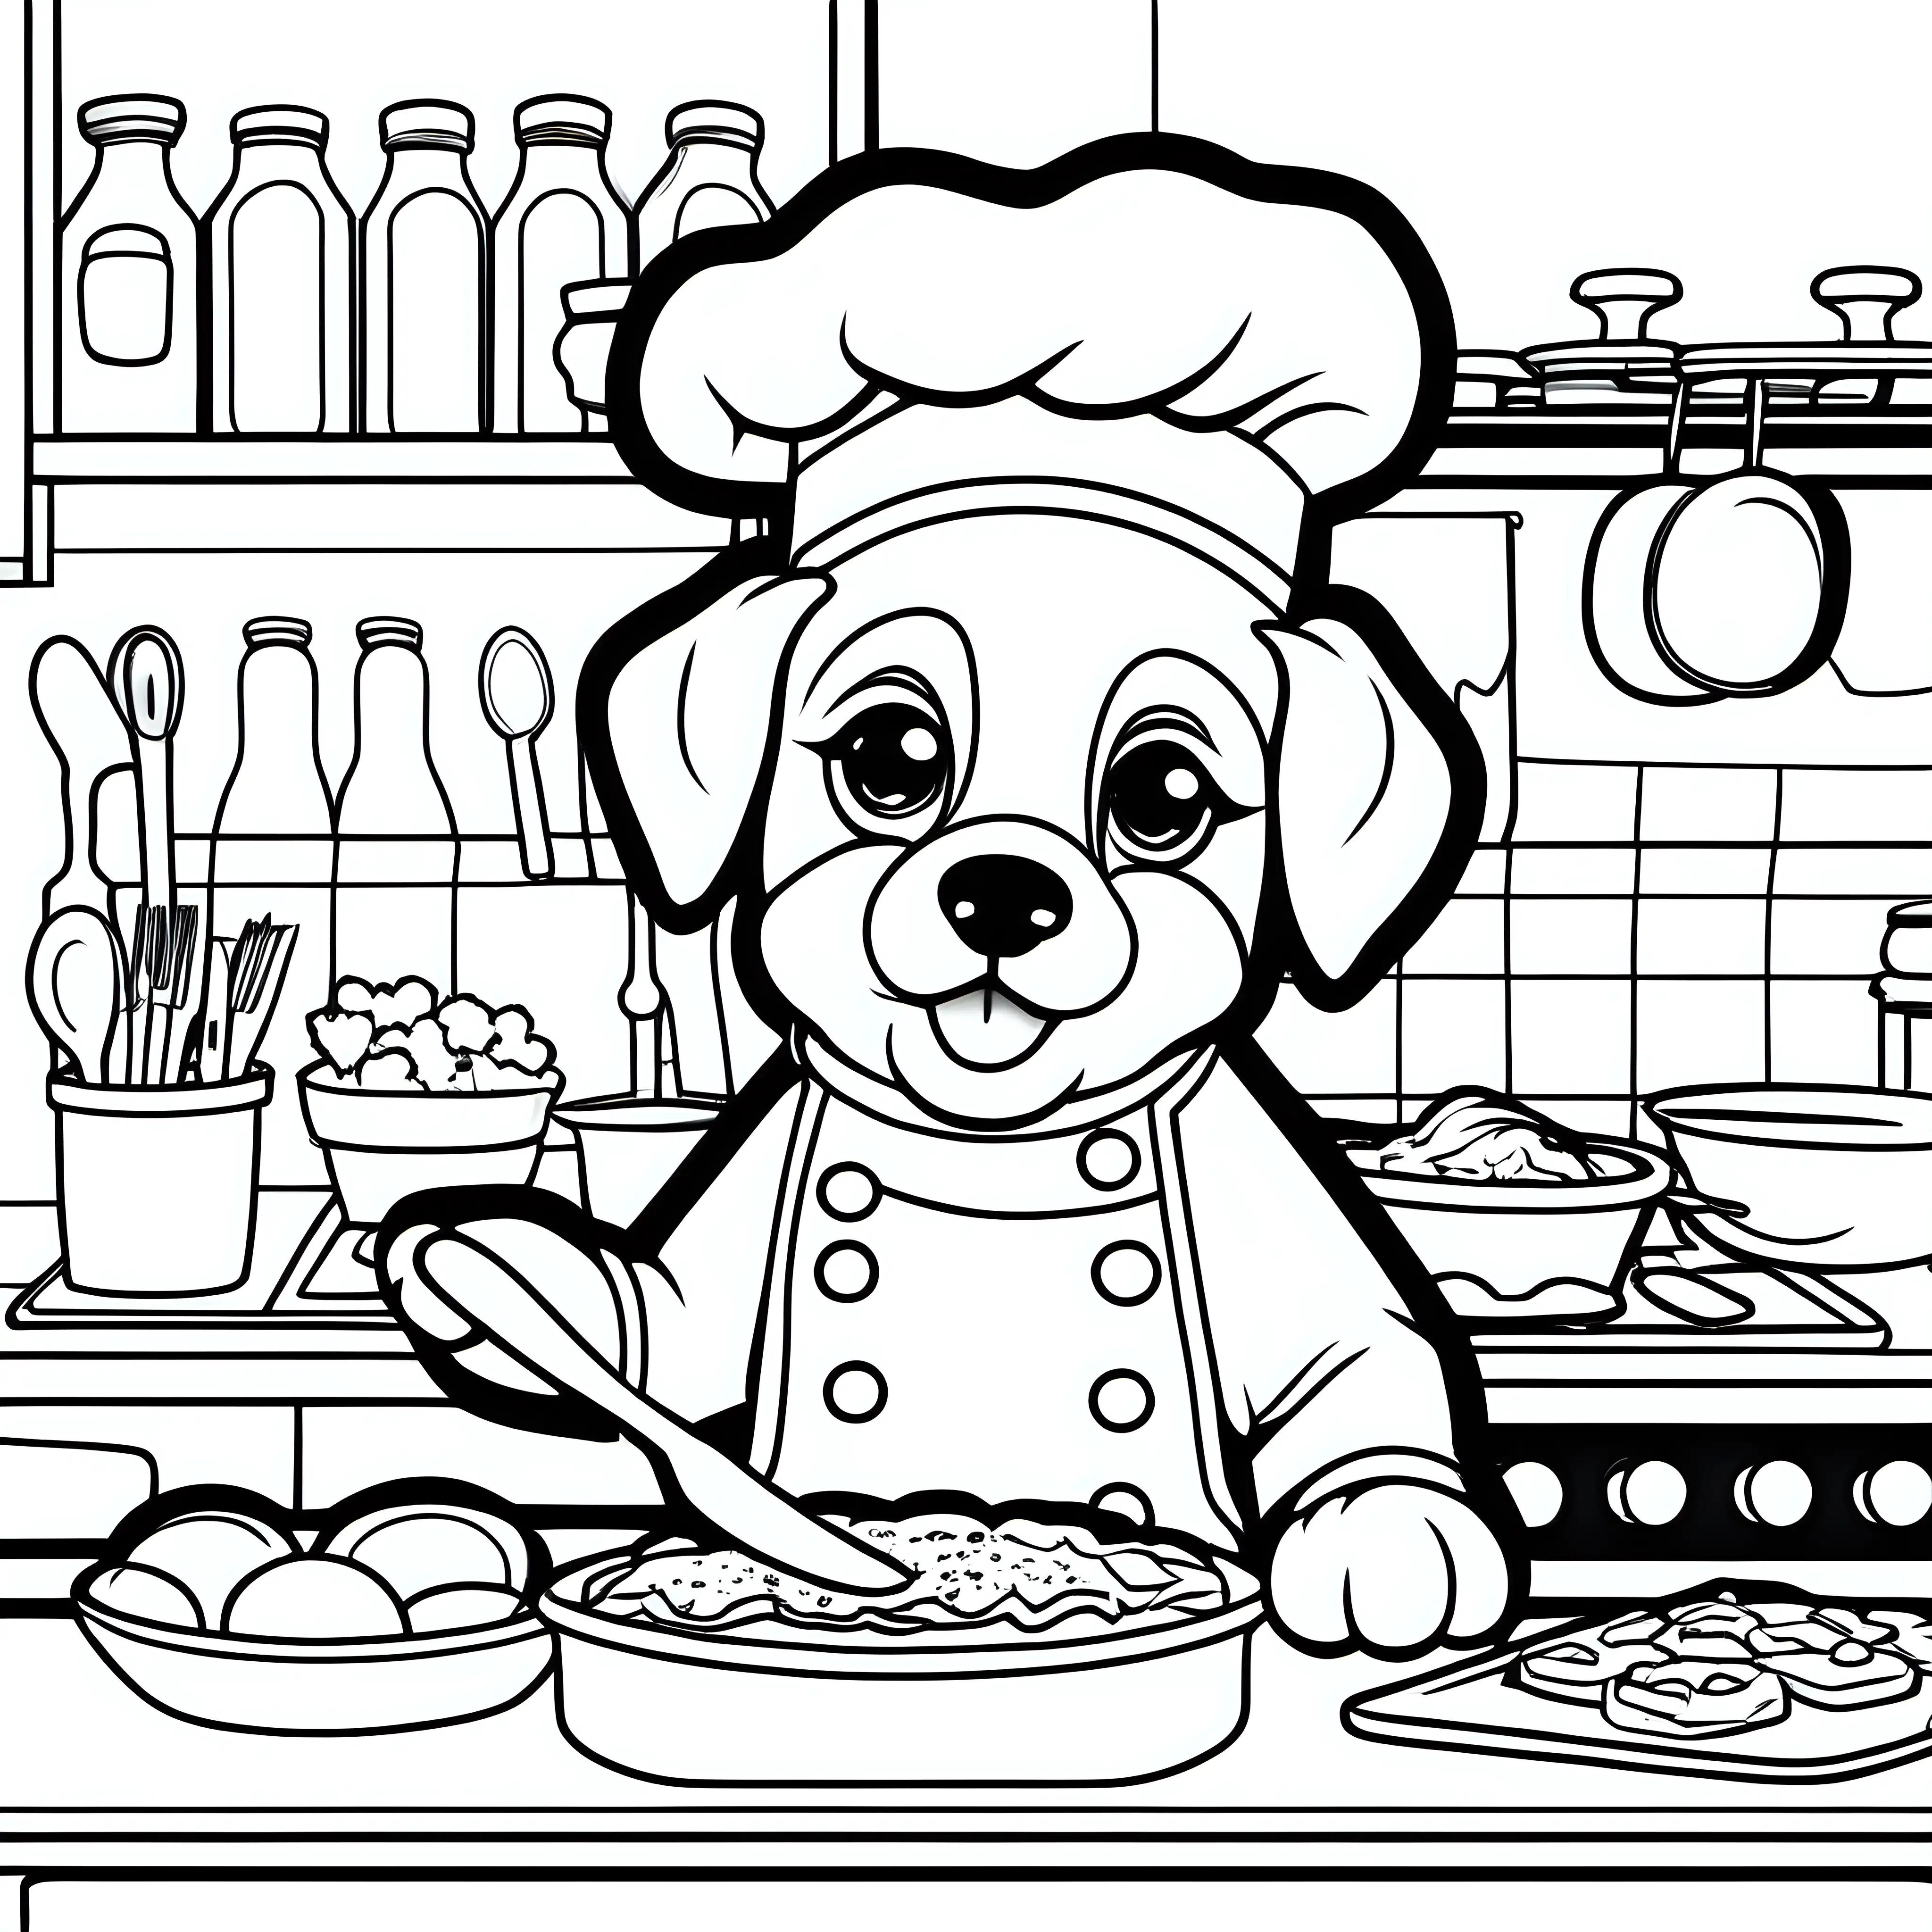 Adorable Puppy Chef Coloring Page for Kids Breakfast Delight